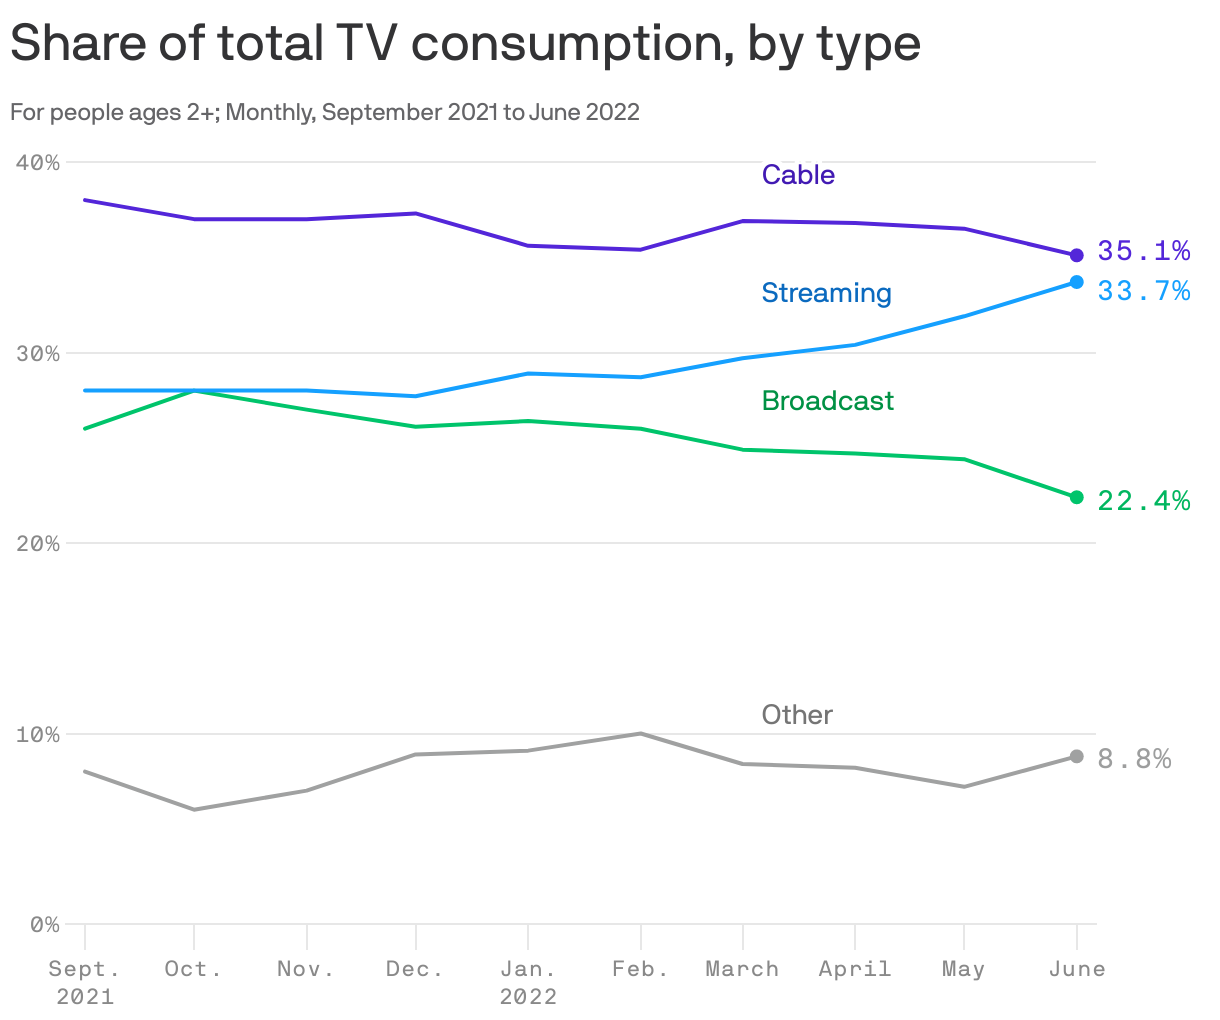 Share of total TV consumption, by type